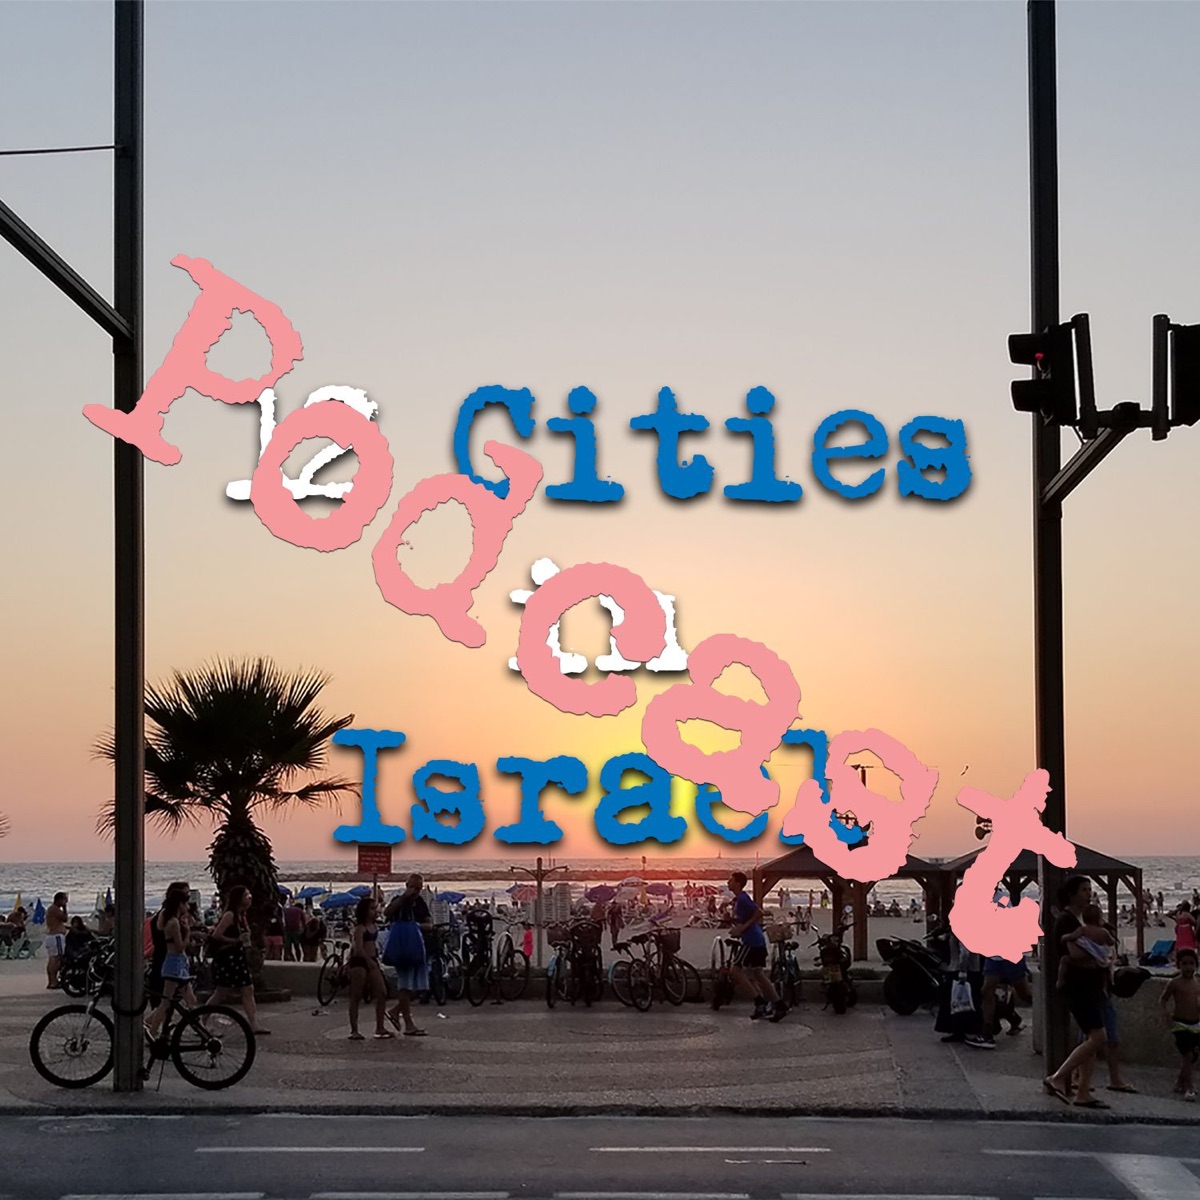 12 Cities In Israel Podcast Podcast Podtail